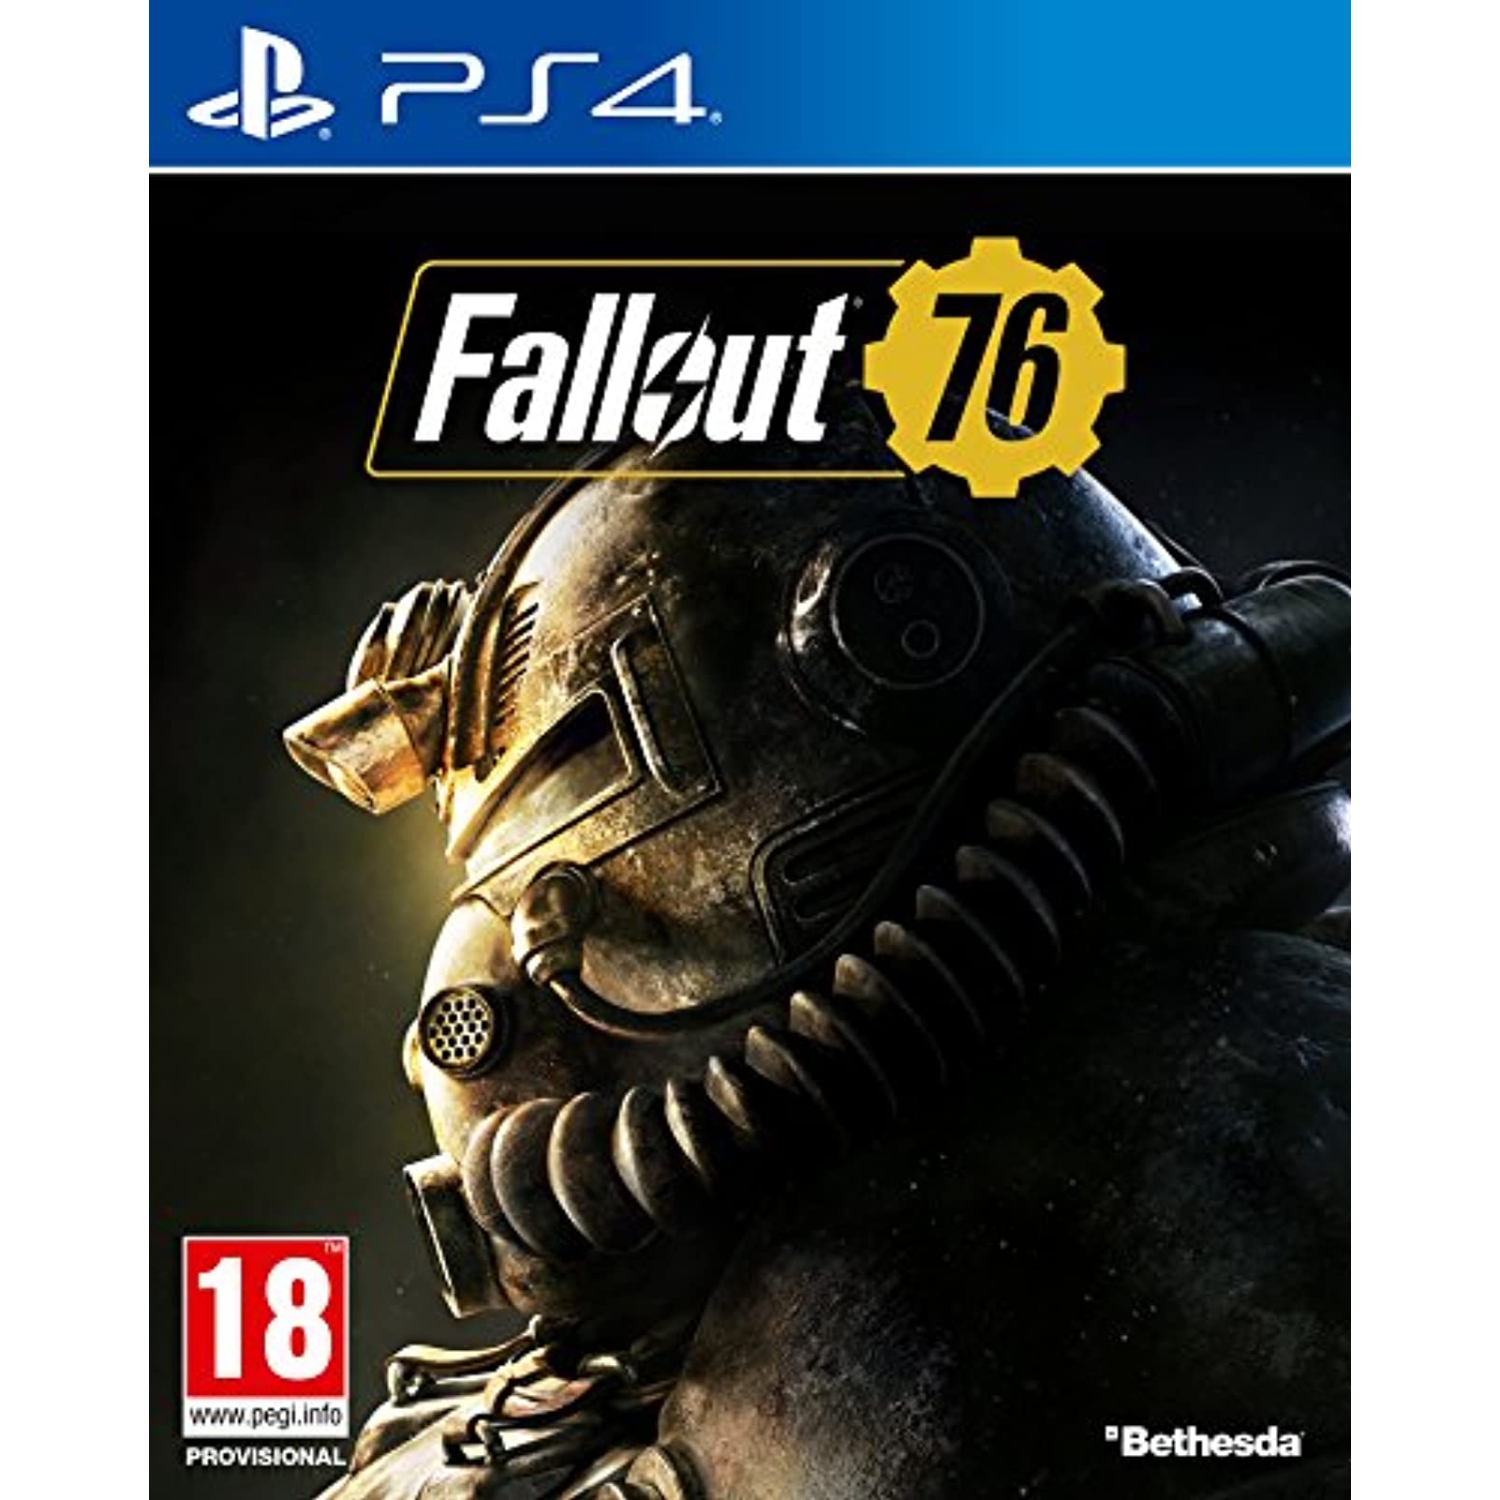 Previously Played - Fallout 76 PS4 For PlayStation 4 RPG